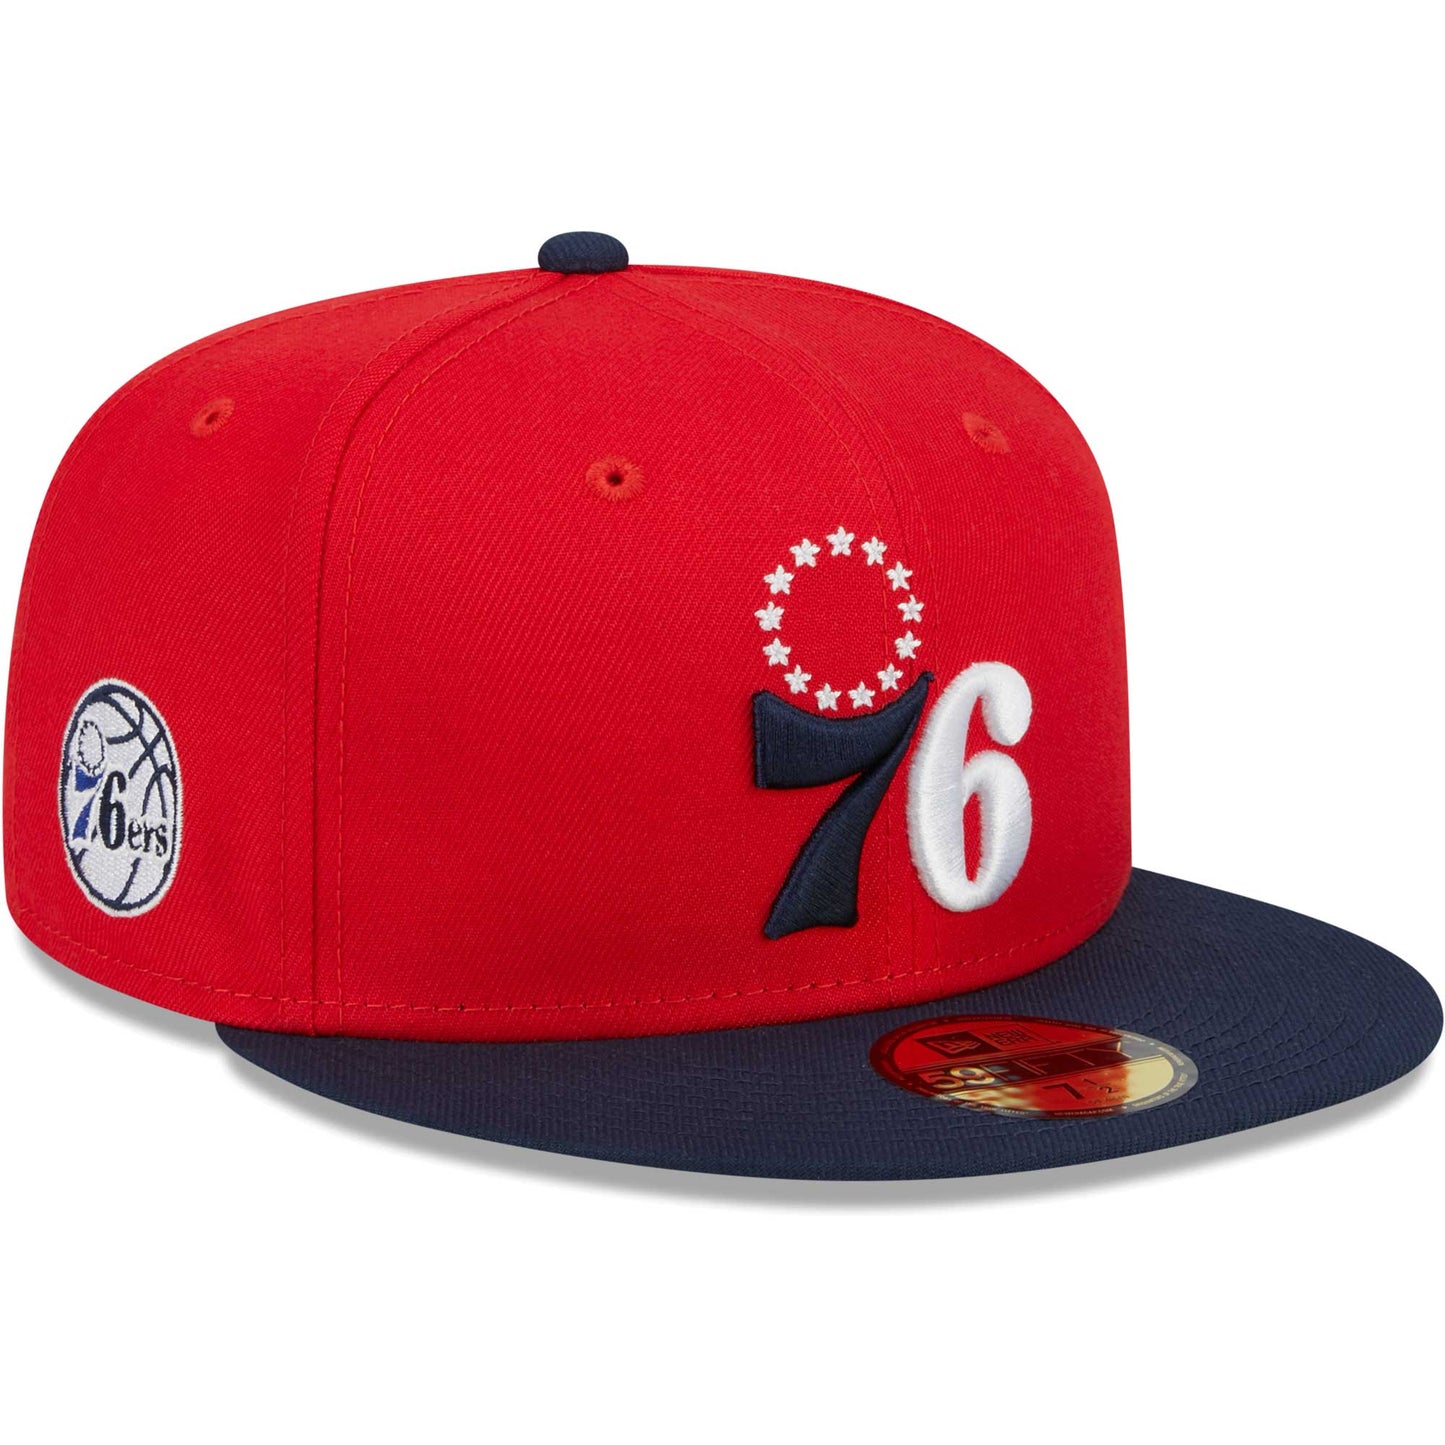 Philadelphia 76ers New Era 59FIFTY Fitted Hat - Red/Navy